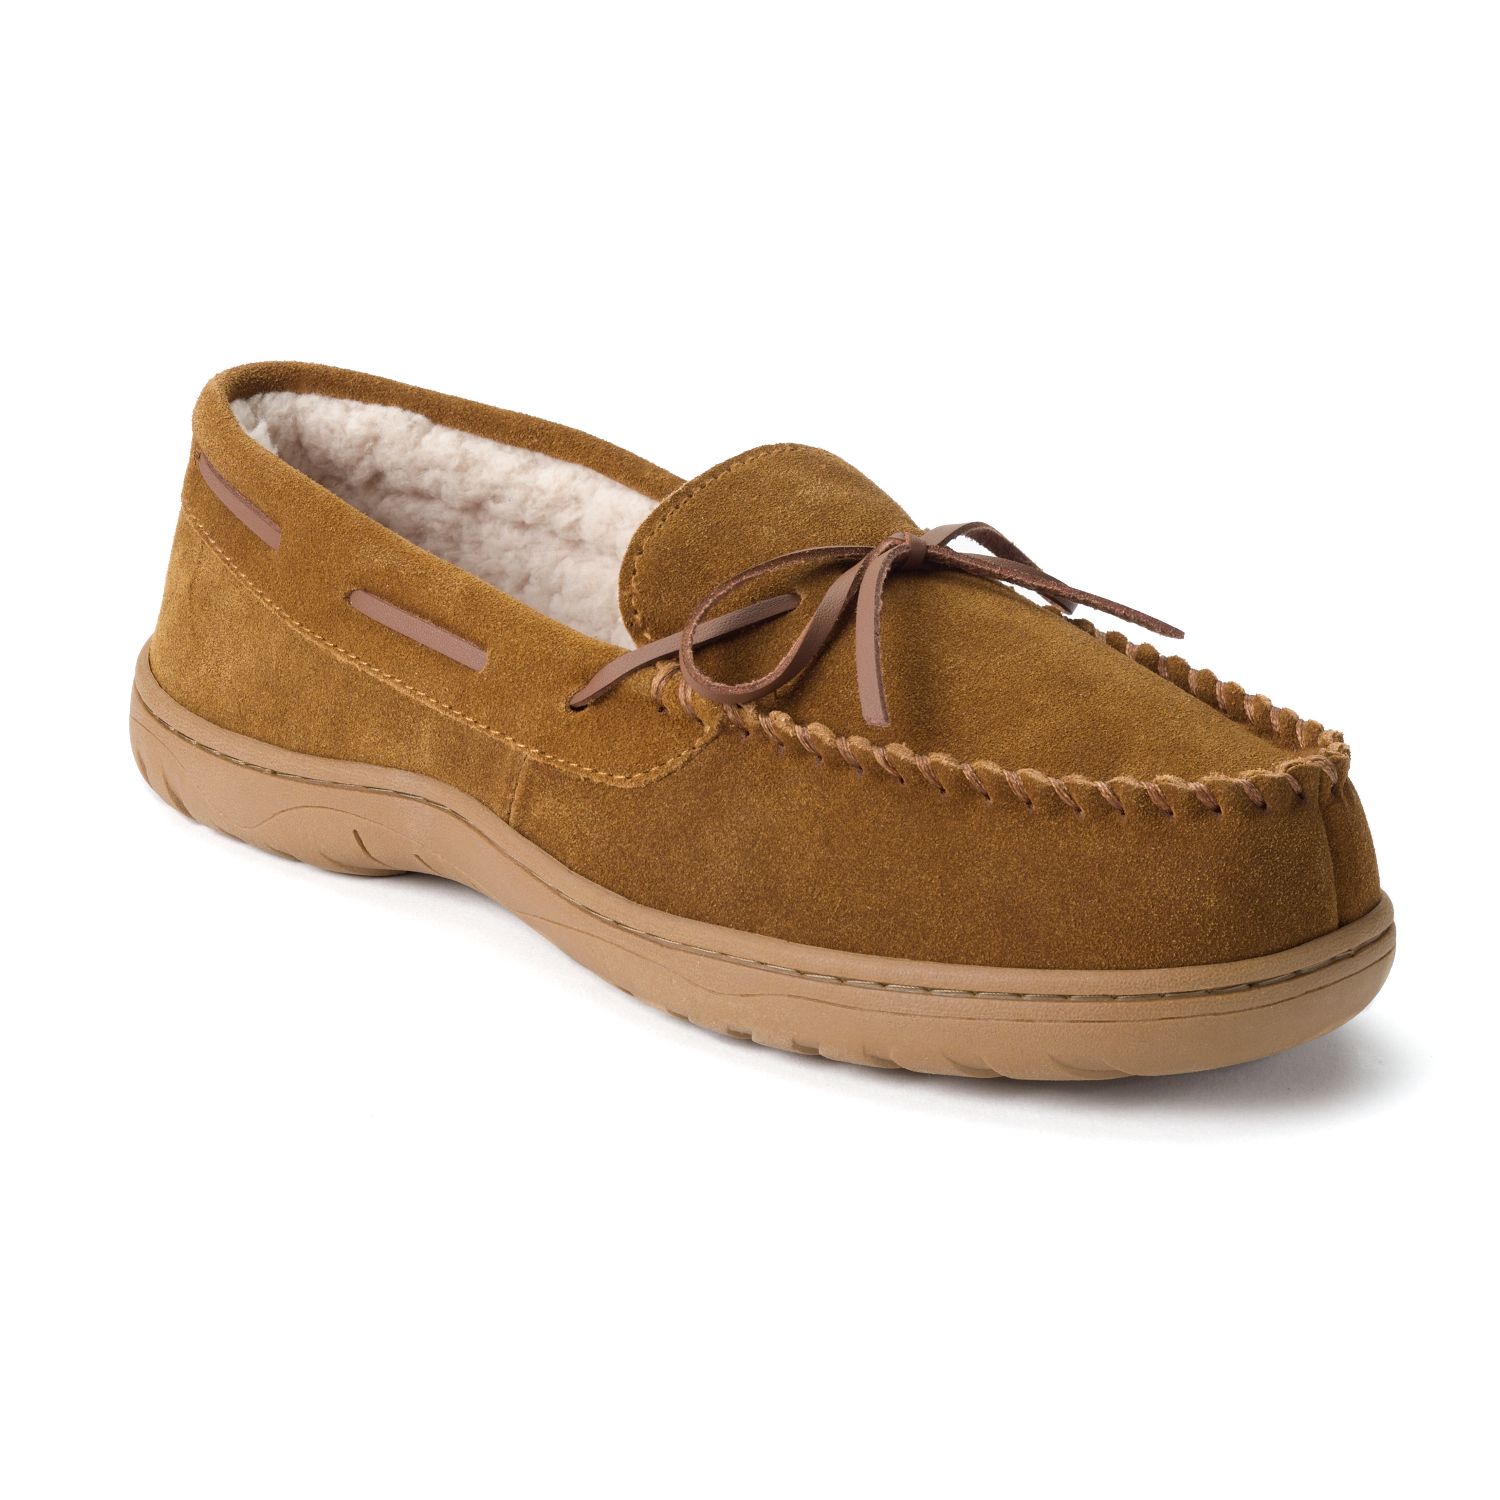 men's chaps suede moccasin slippers